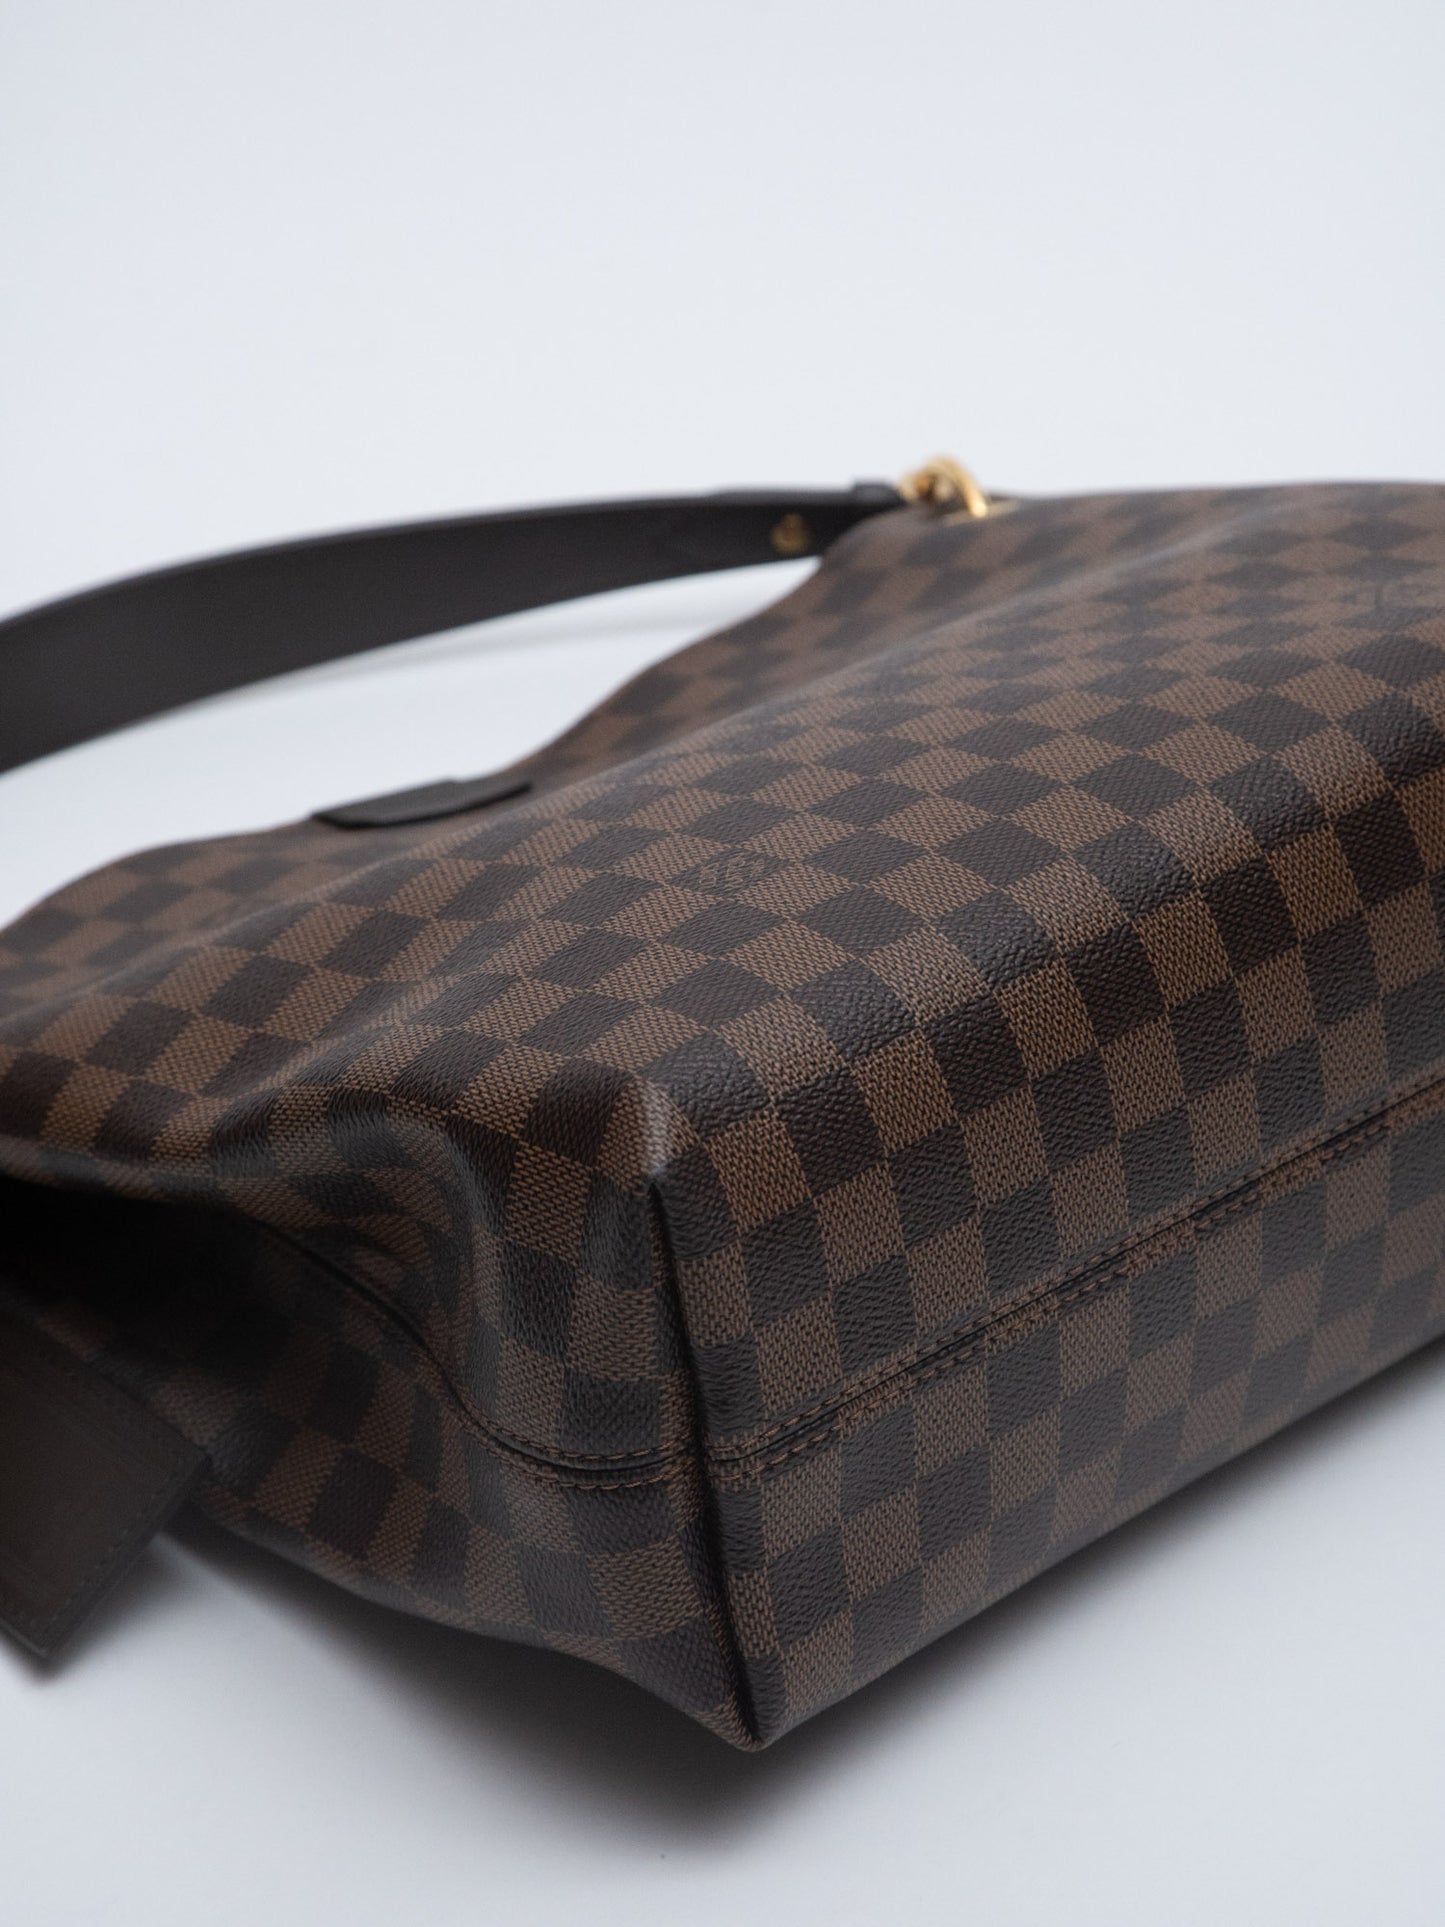 Louis Vuitton Damier Ebene Graceful MM N44045 is great for all